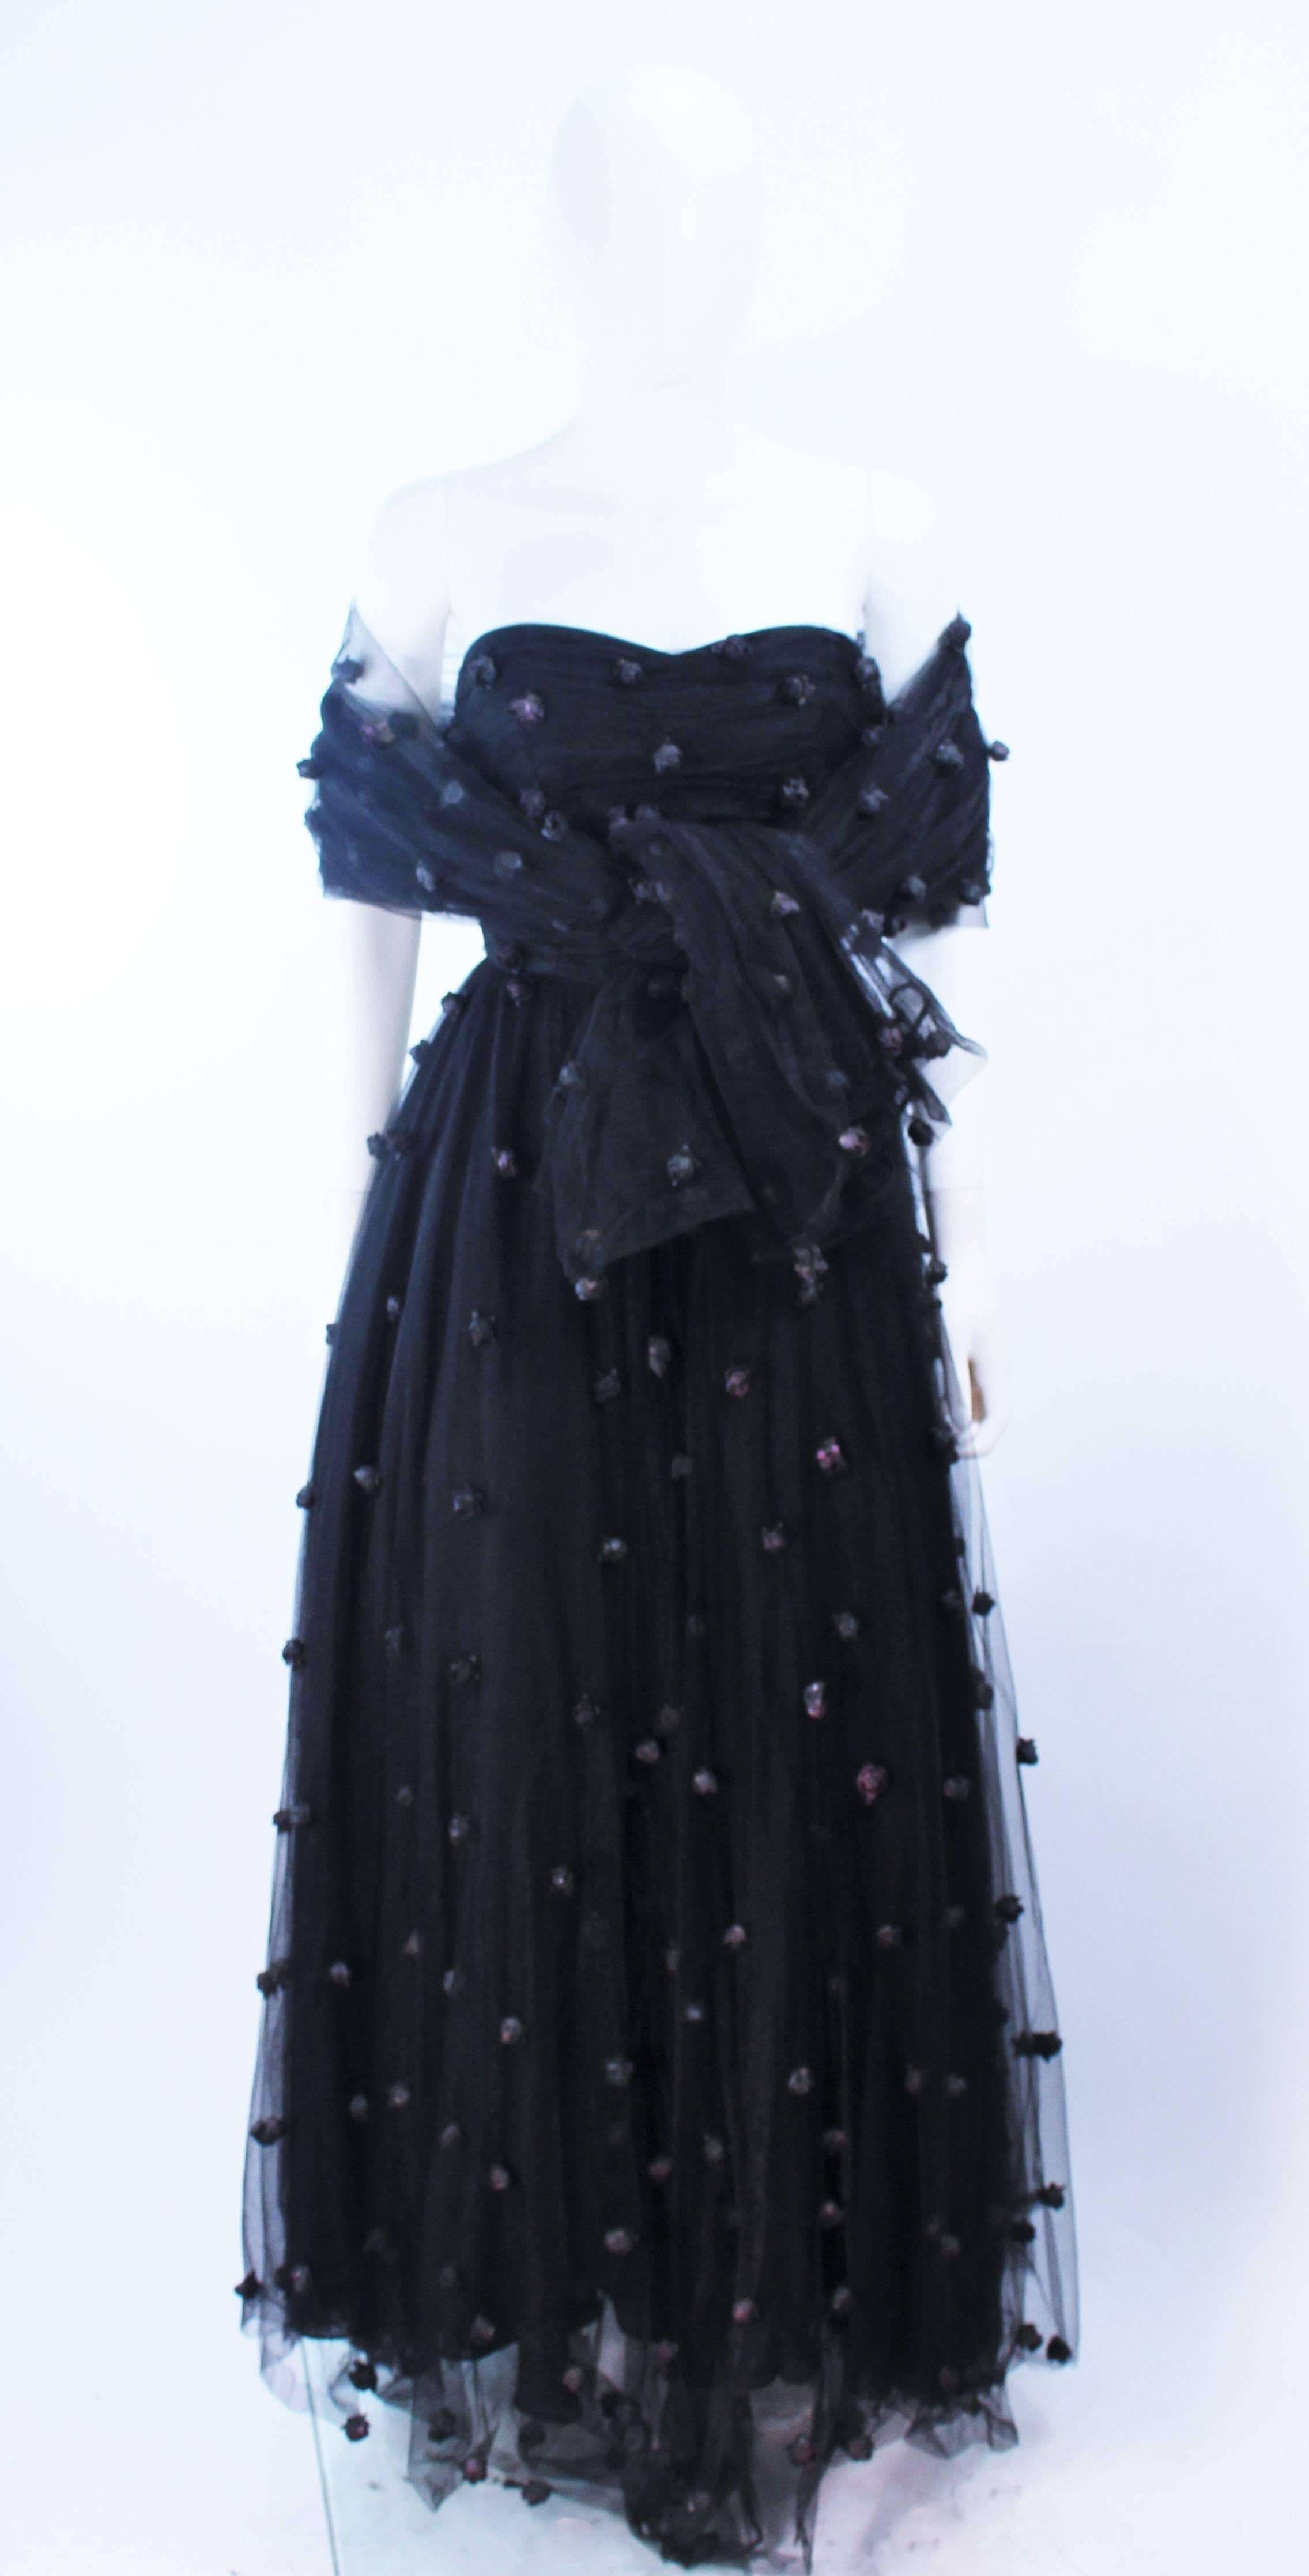 This Pamela Dennis attributed gown is composed of black mesh with rose applique. There is a center back zipper closure. In great vintage condition, label is missing.

**Please cross-reference measurements for personal accuracy. Size in description